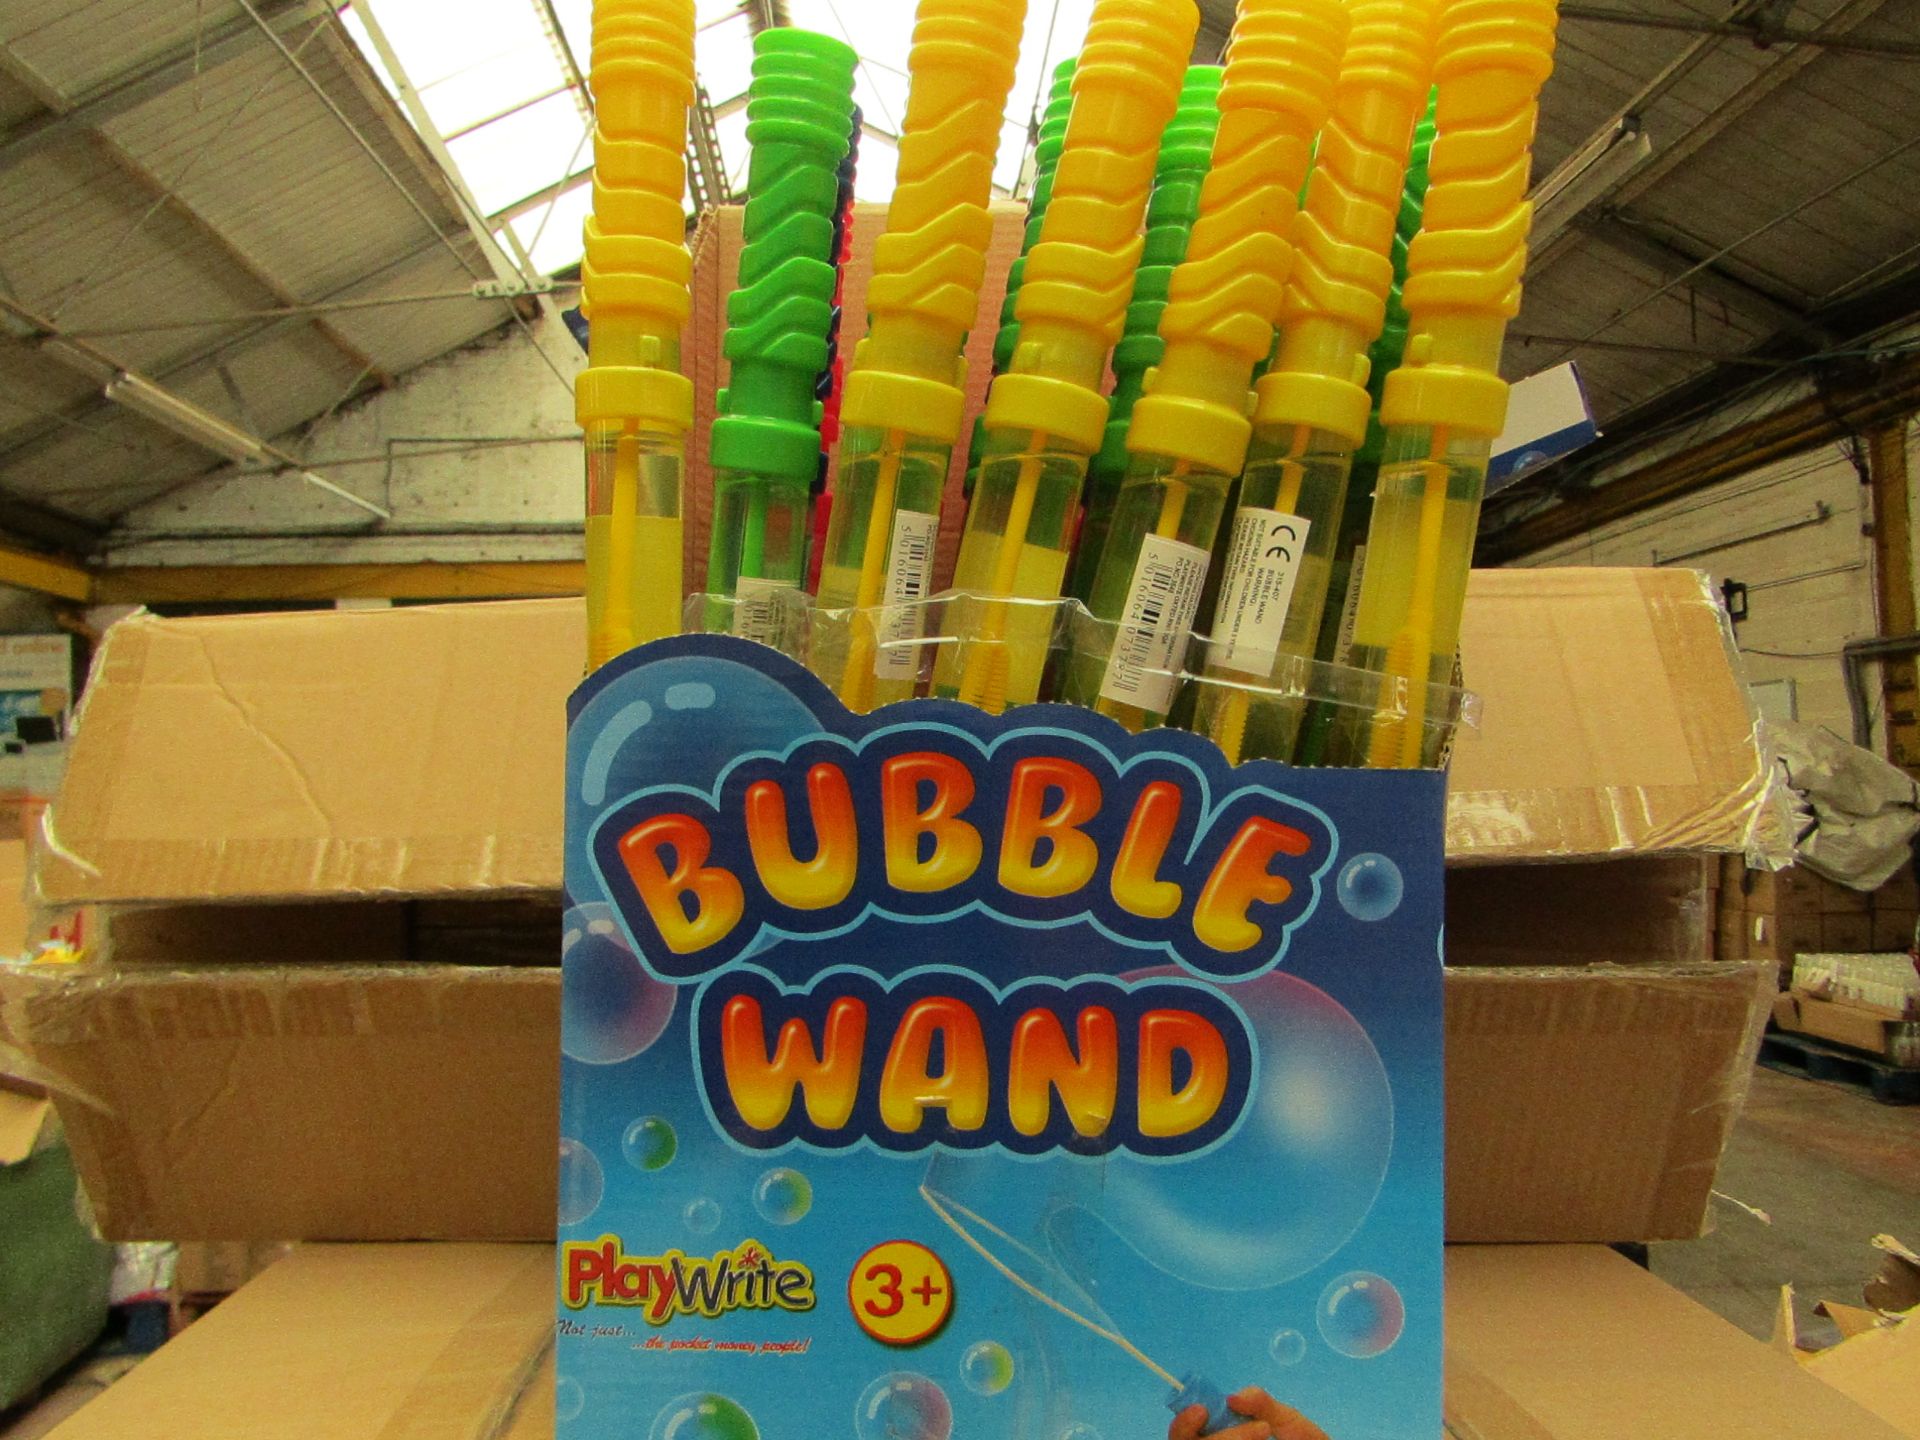 24x PlayWrite - Bubble Wand's - Packaged & Boxed.